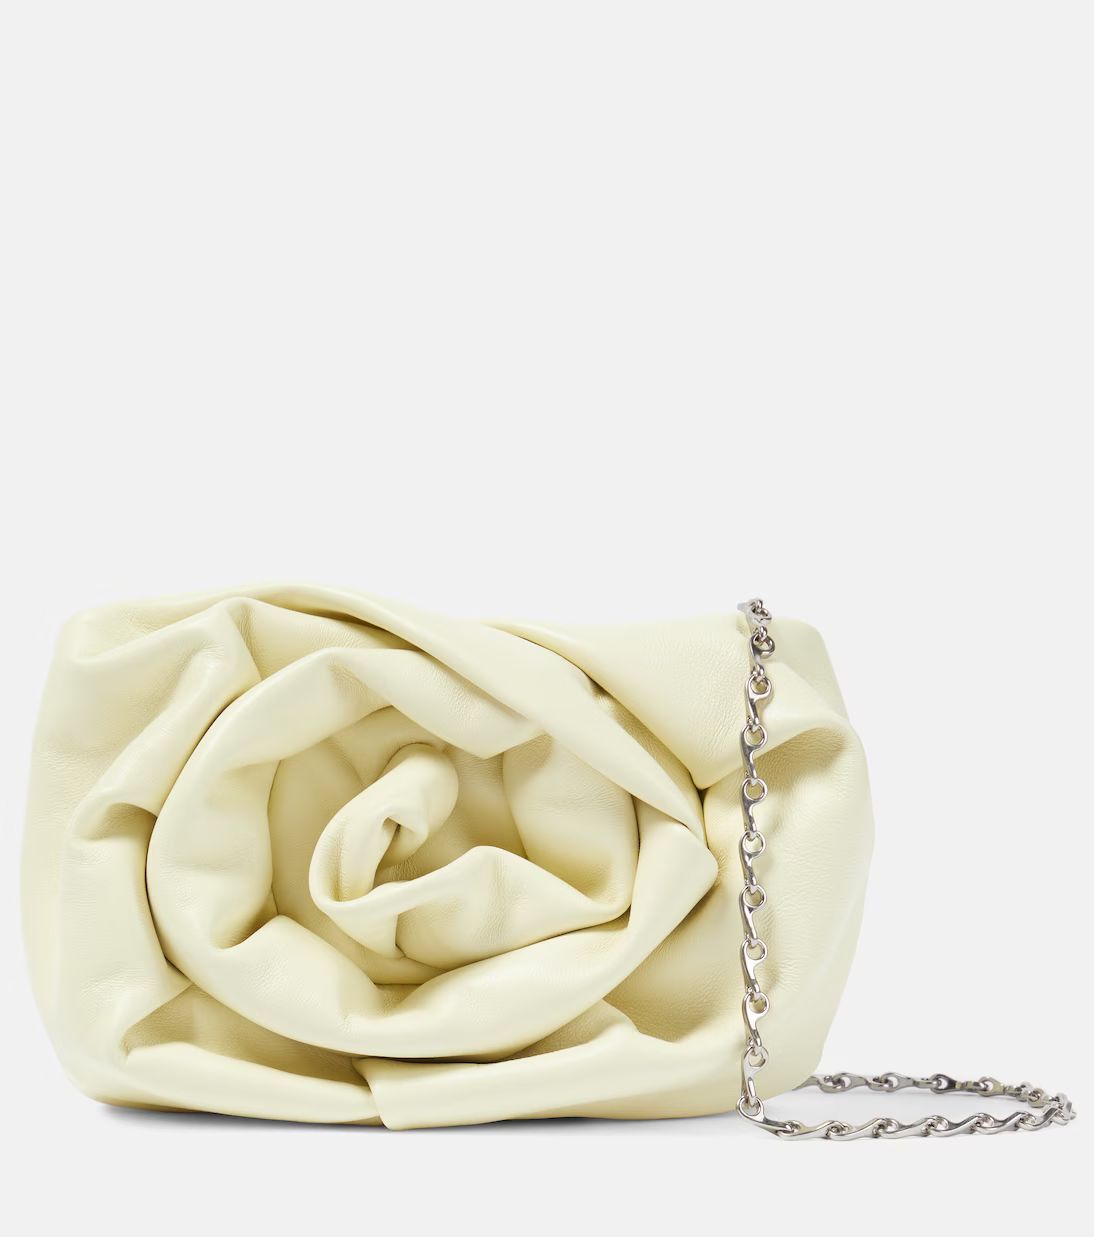 BurberryRose gathered leather clutch $ 2,490incl. duties and handling fees; excl. taxes and shipp... | Mytheresa (US/CA)